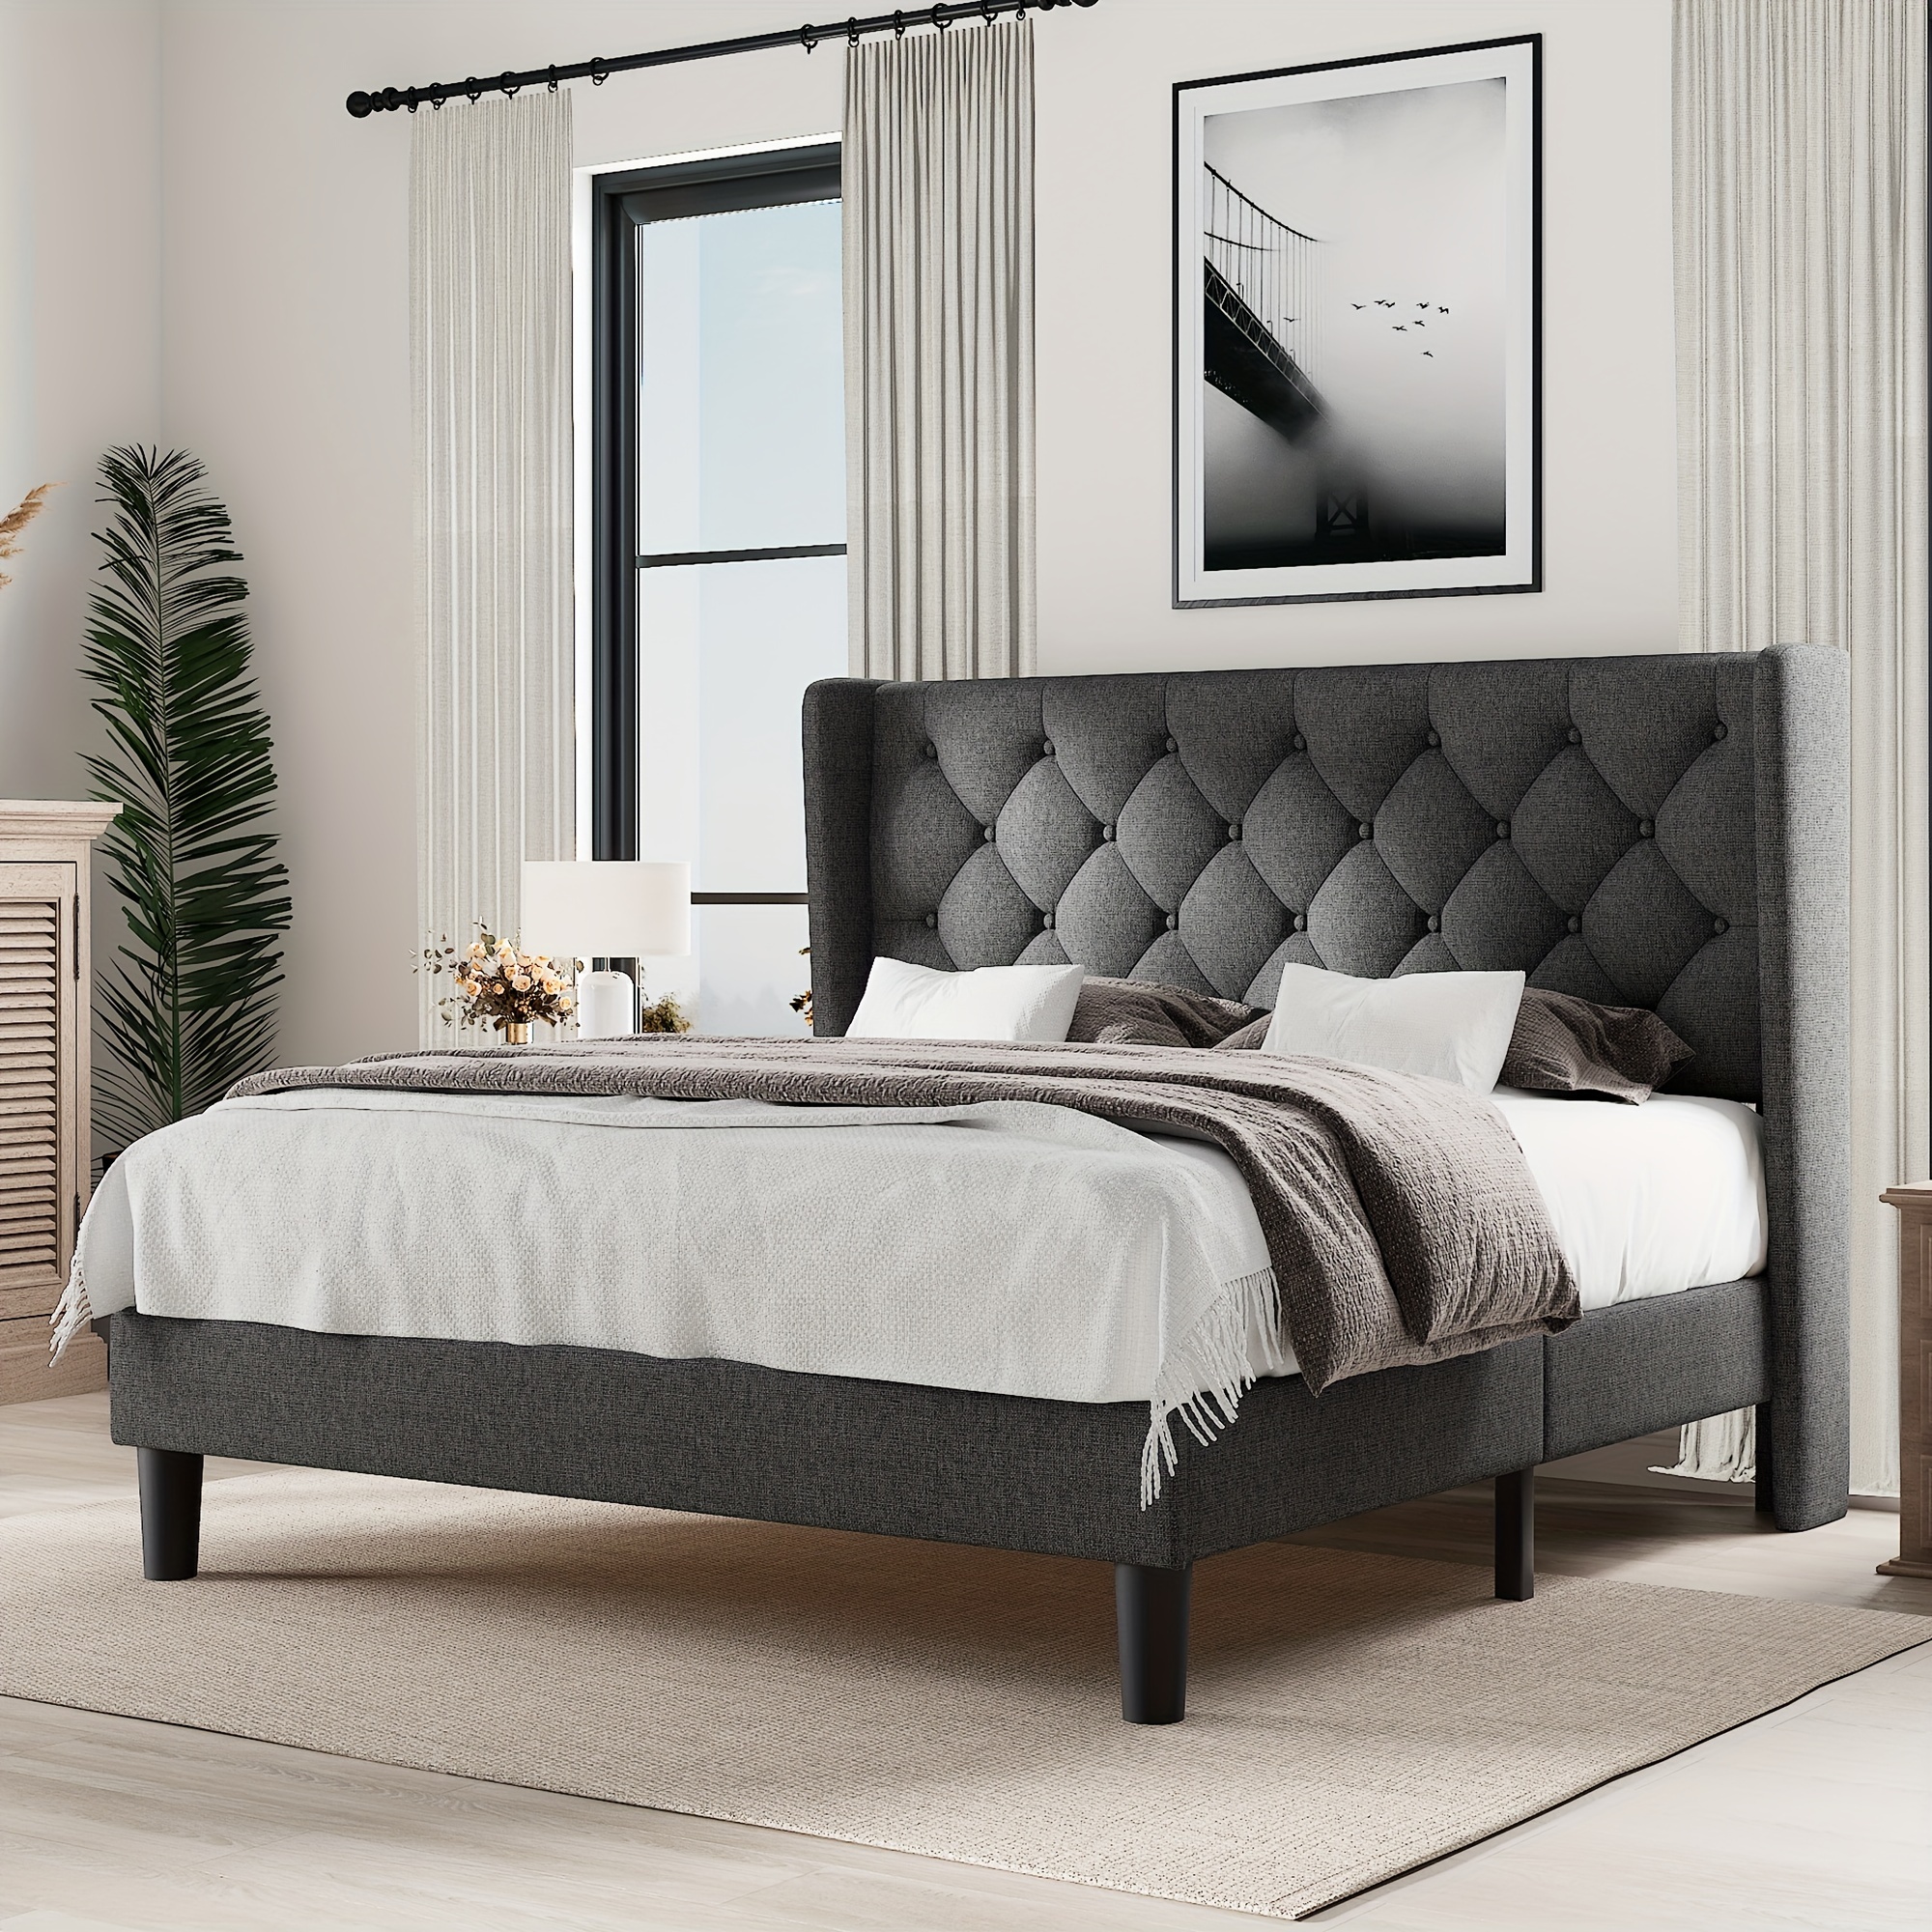 

Full Size Bed Frame With Upholstered Wingback Headboard, Wooden And Metal Platform Bed, 8" Under Bed Storage, High-density Sponge, No Box Spring Needed, Noise-free, Dark Grey